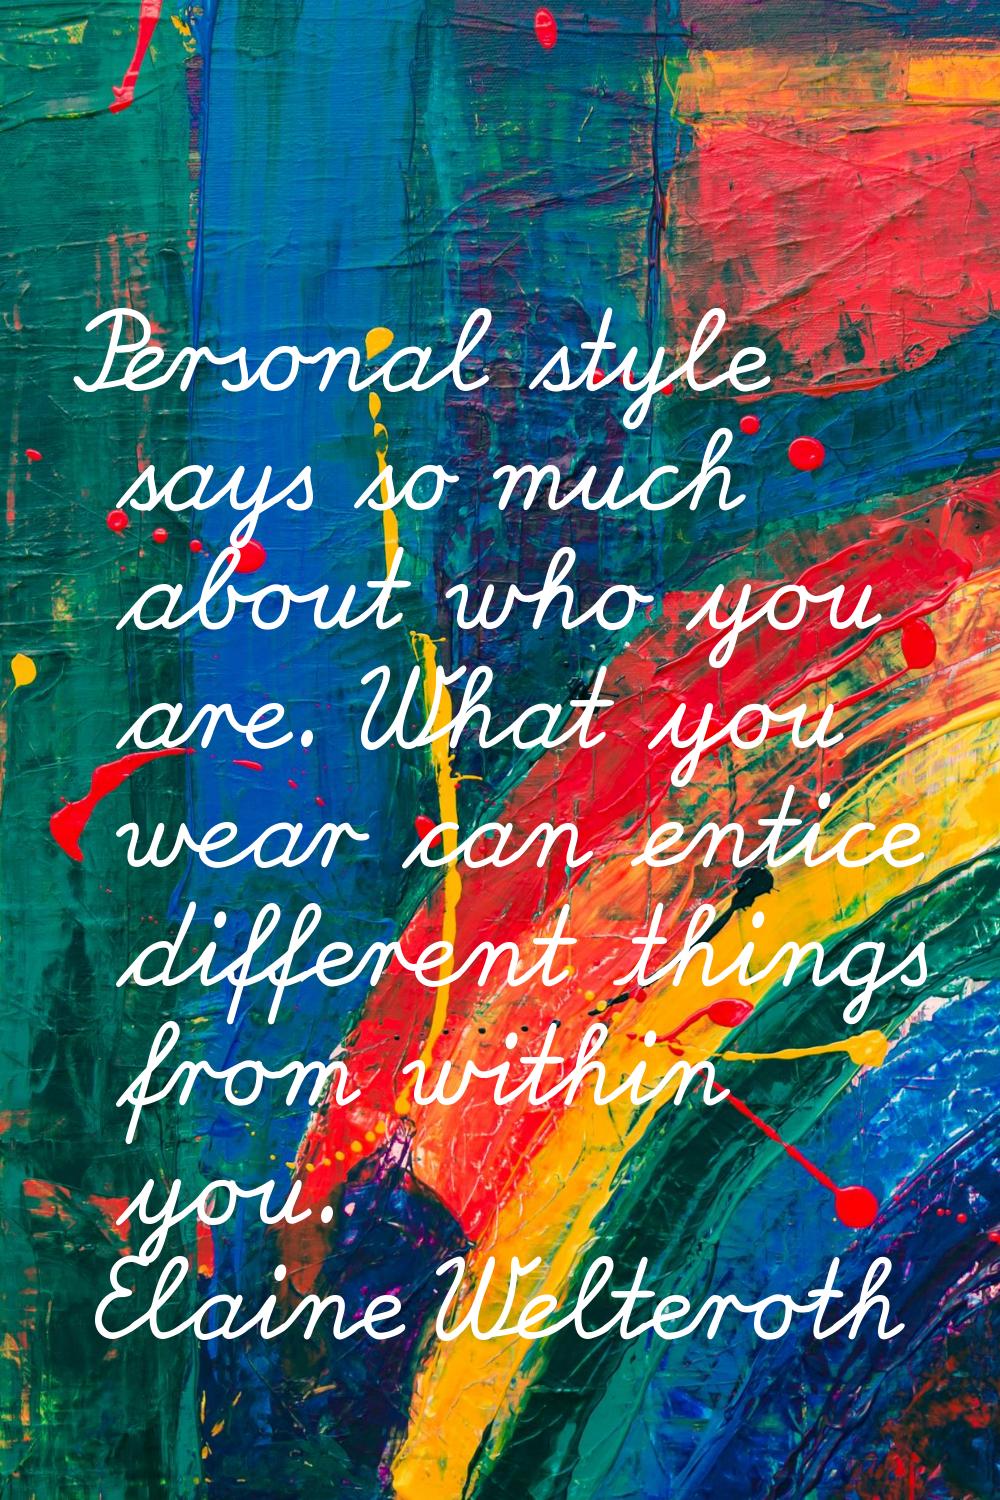 Personal style says so much about who you are. What you wear can entice different things from withi